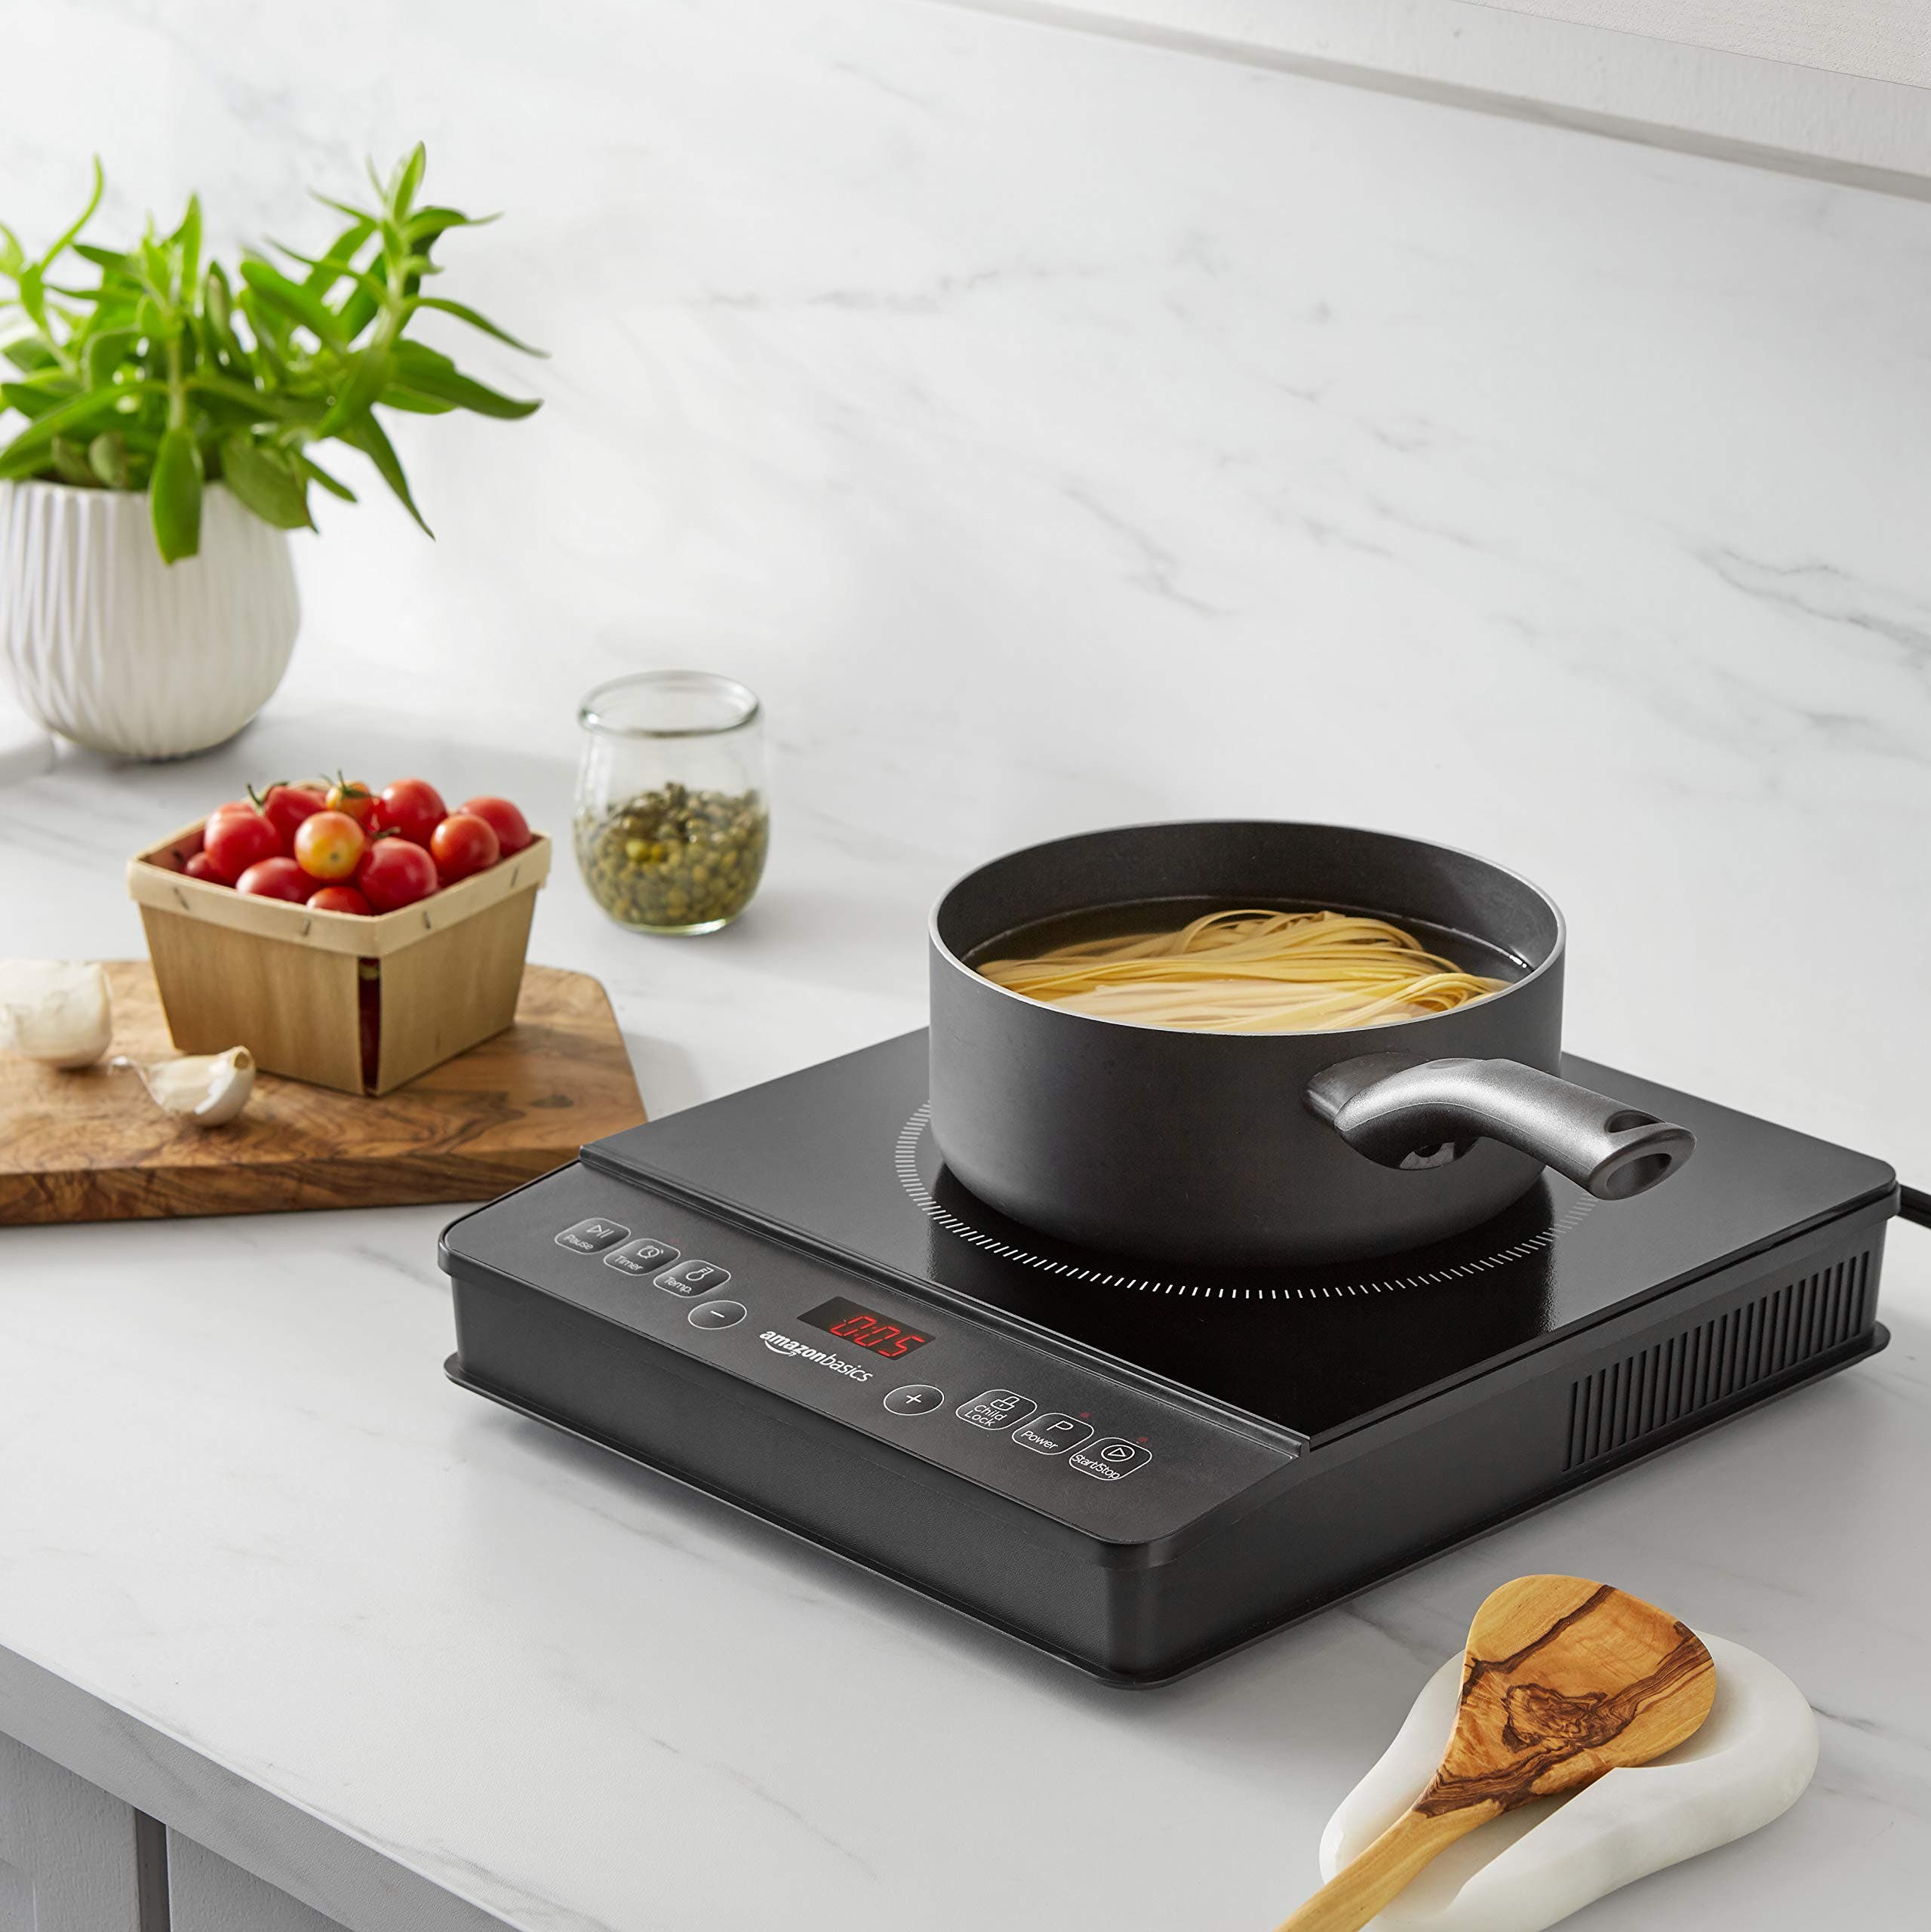 https://cleantechnica.com/wp-content/uploads/2023/06/induction-stove-cooking.jpeg